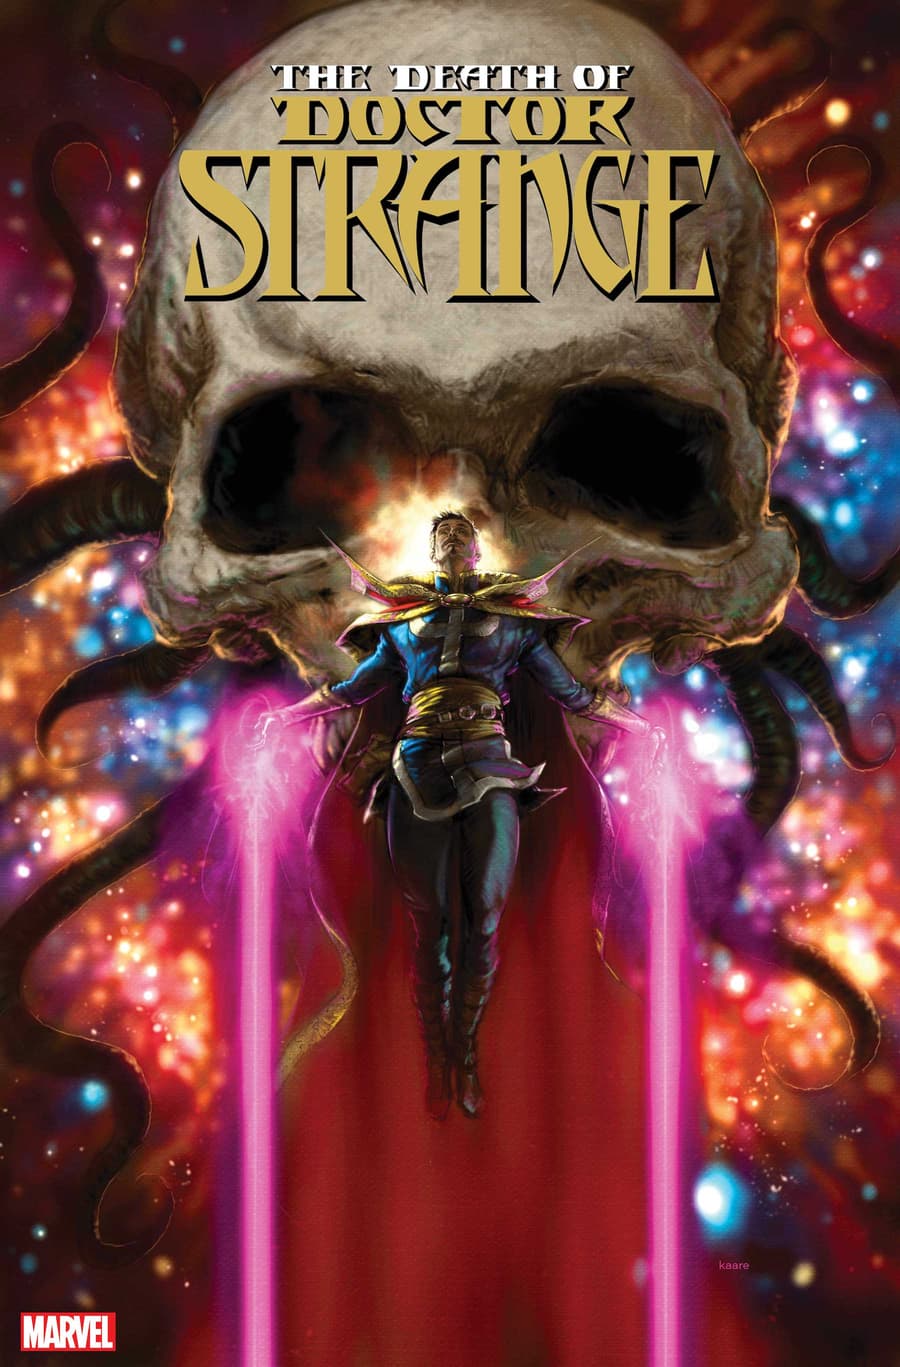 DEATH OF DOCTOR STRANGE #1 cover by Kaare Andrews